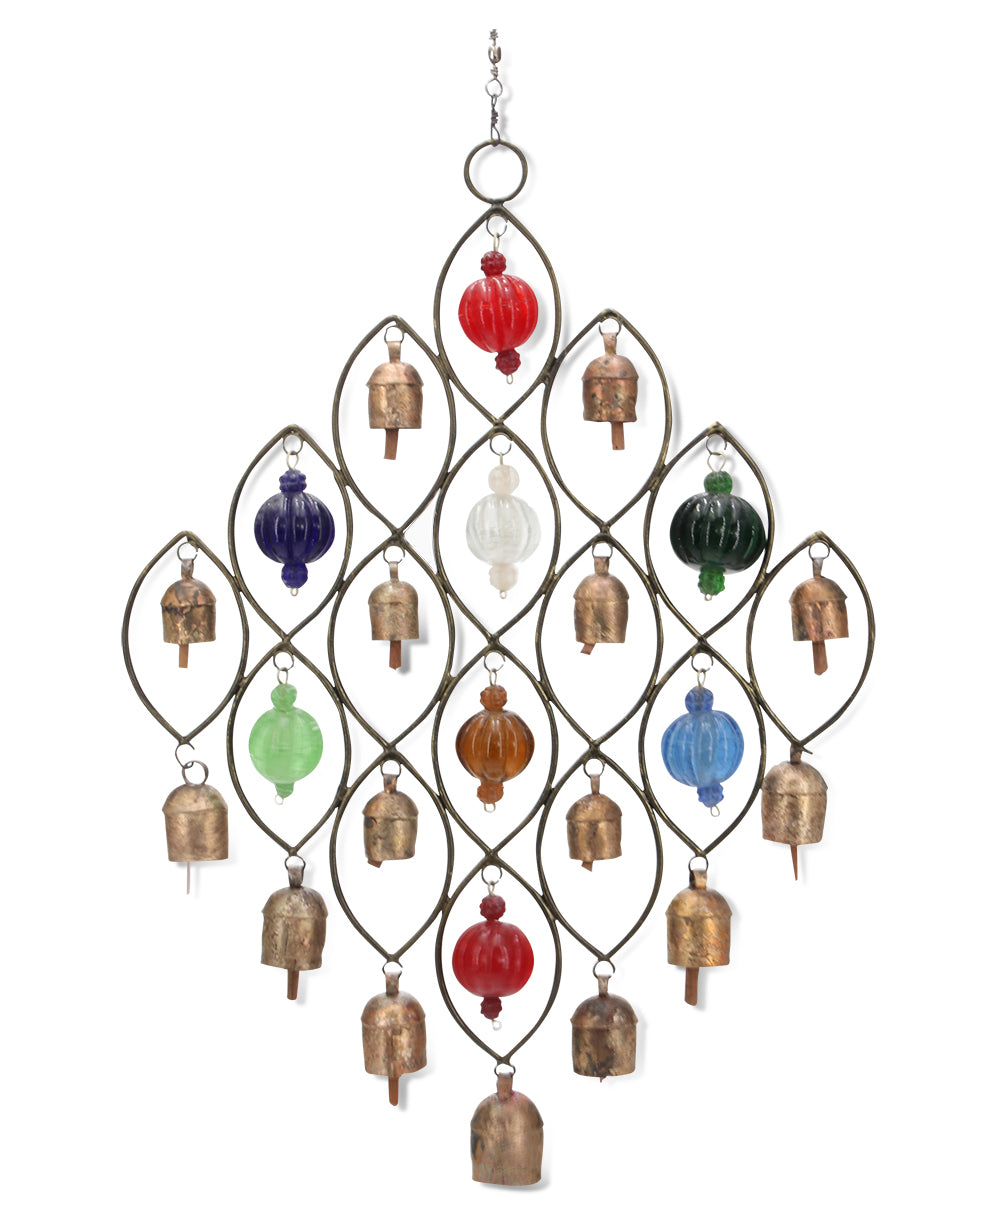 Recycled metal lattice grid wall hanging with glass beads and nana bells